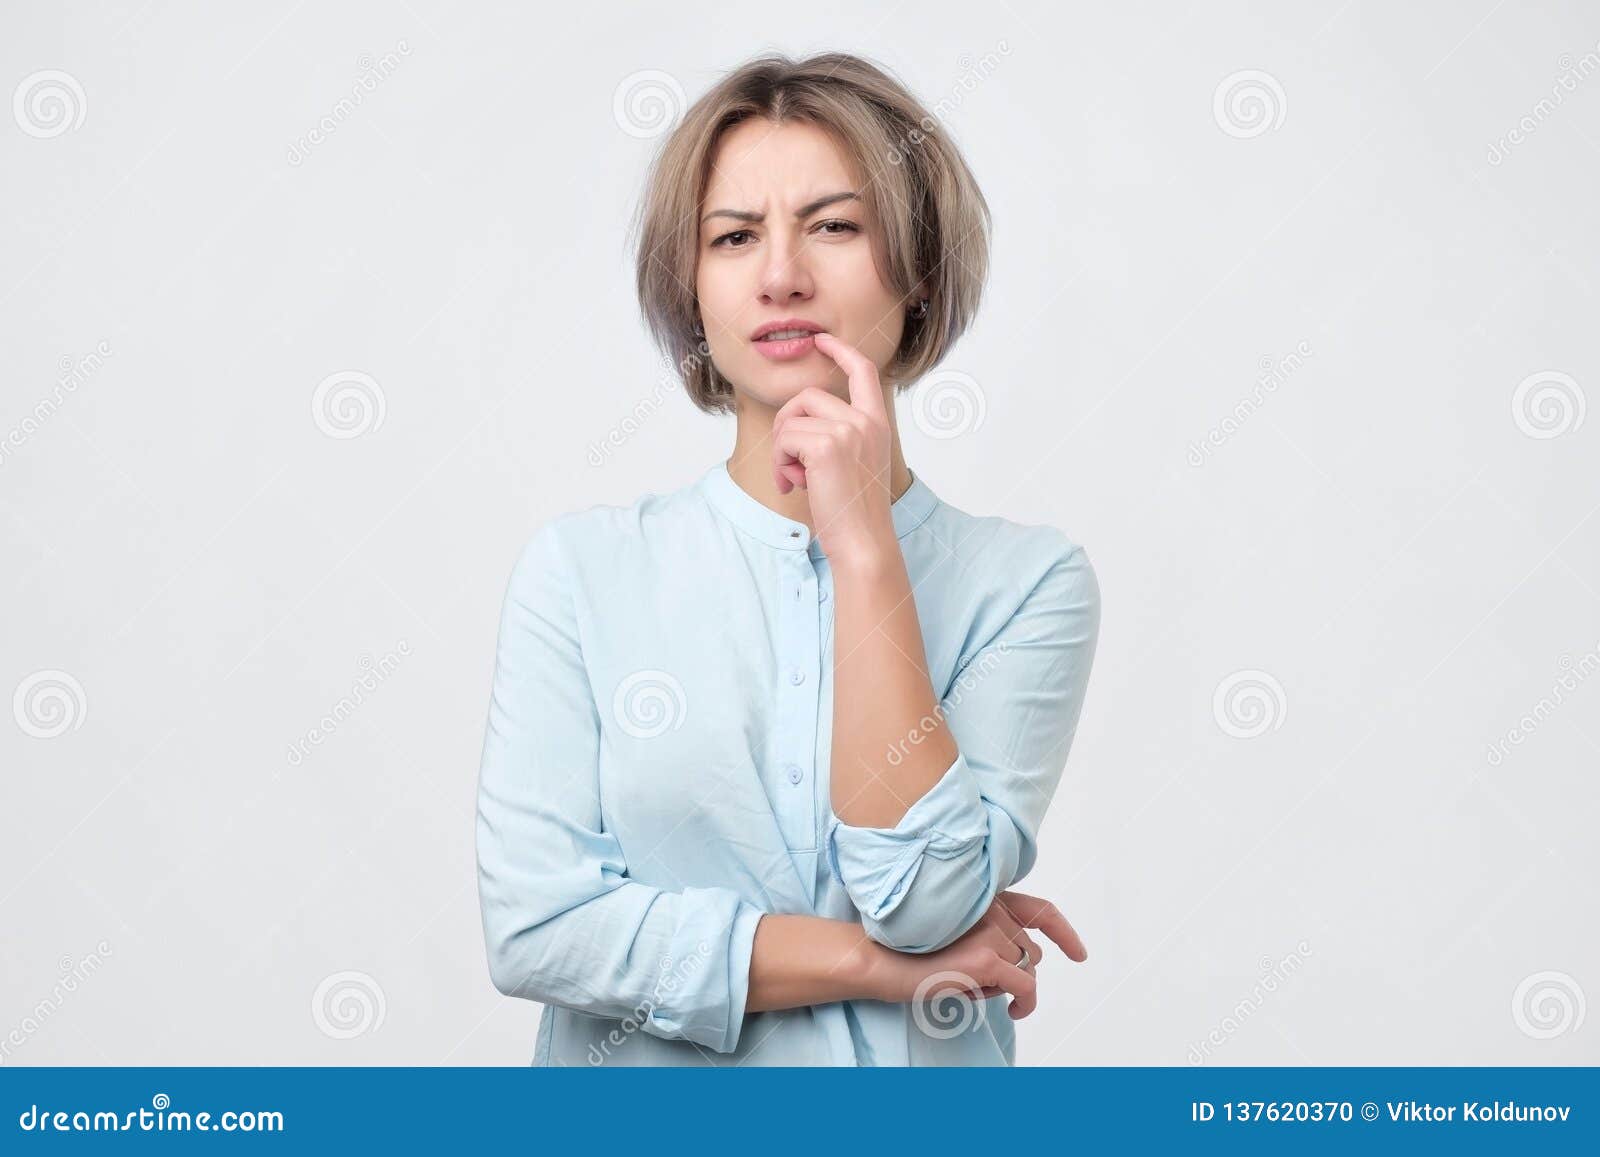 doubtful, thoughtful woman remembering something. young emotional woman.